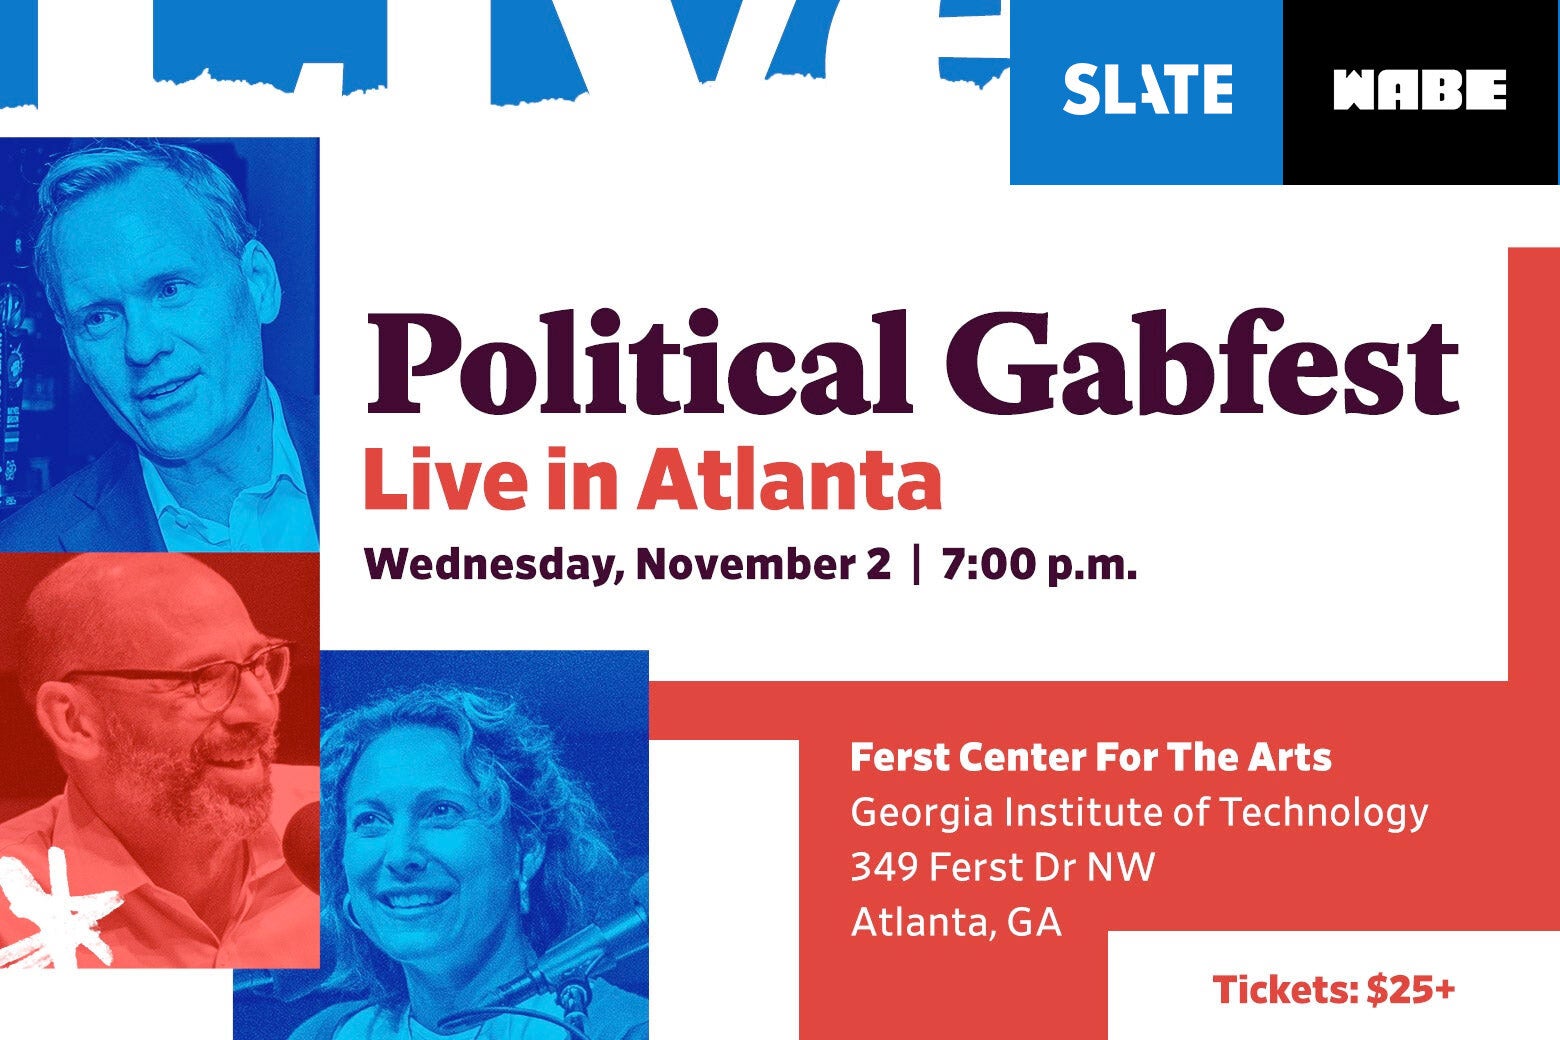 Image with text: "Political Gabfest Live in Atlanta" 